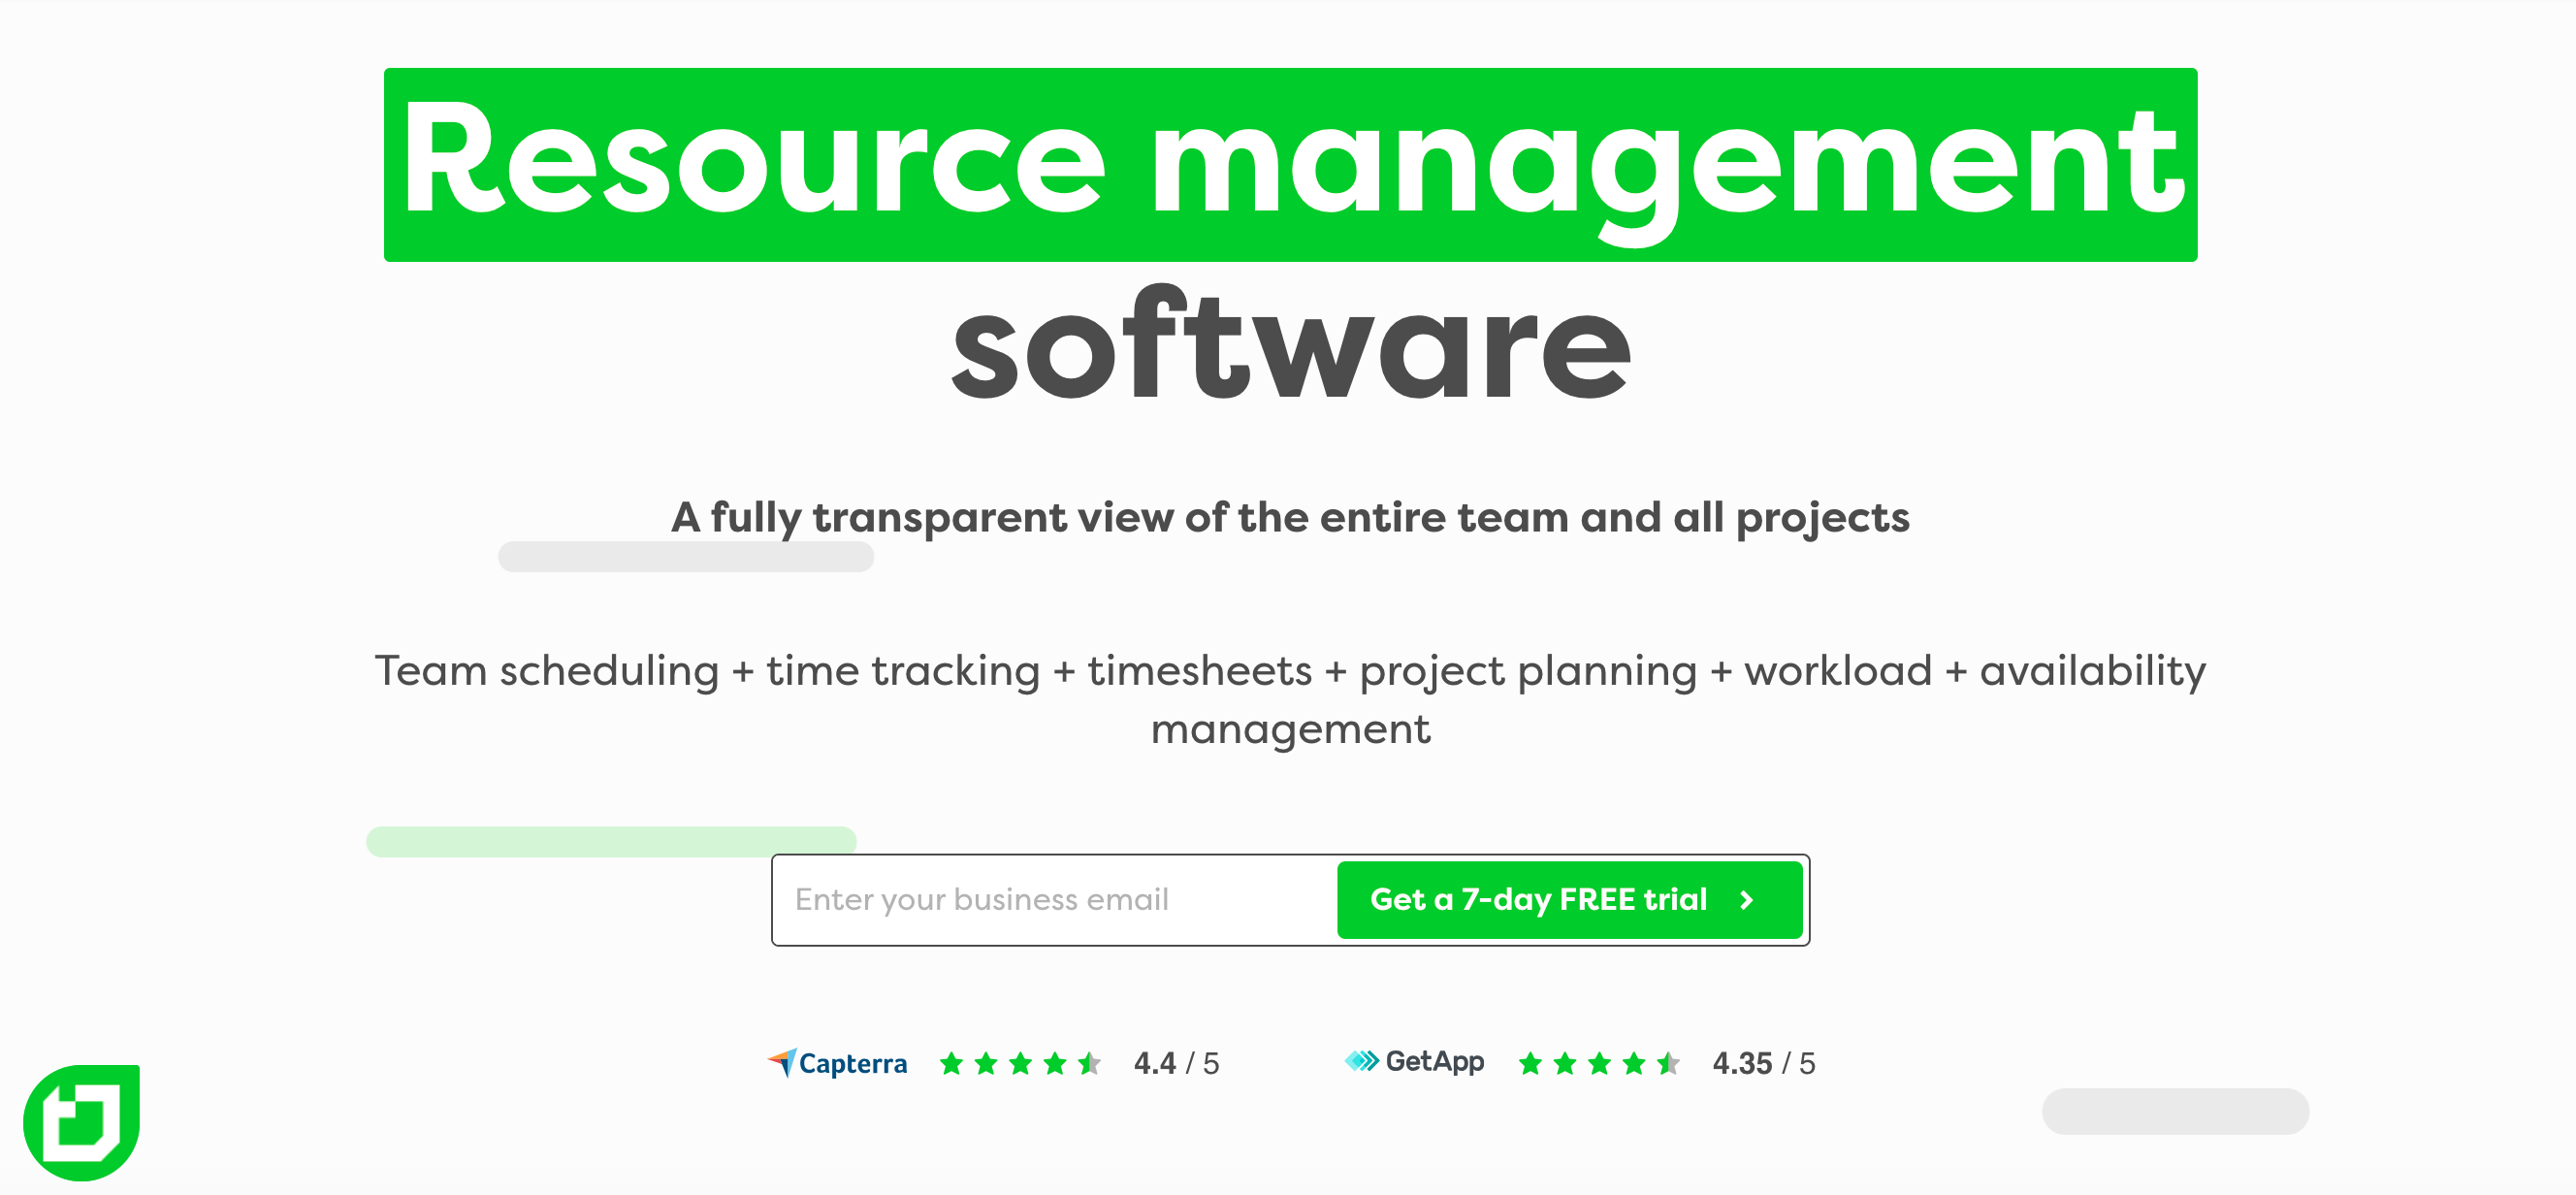 Teamdeck is resource management software used for a transparent view of the team and projects